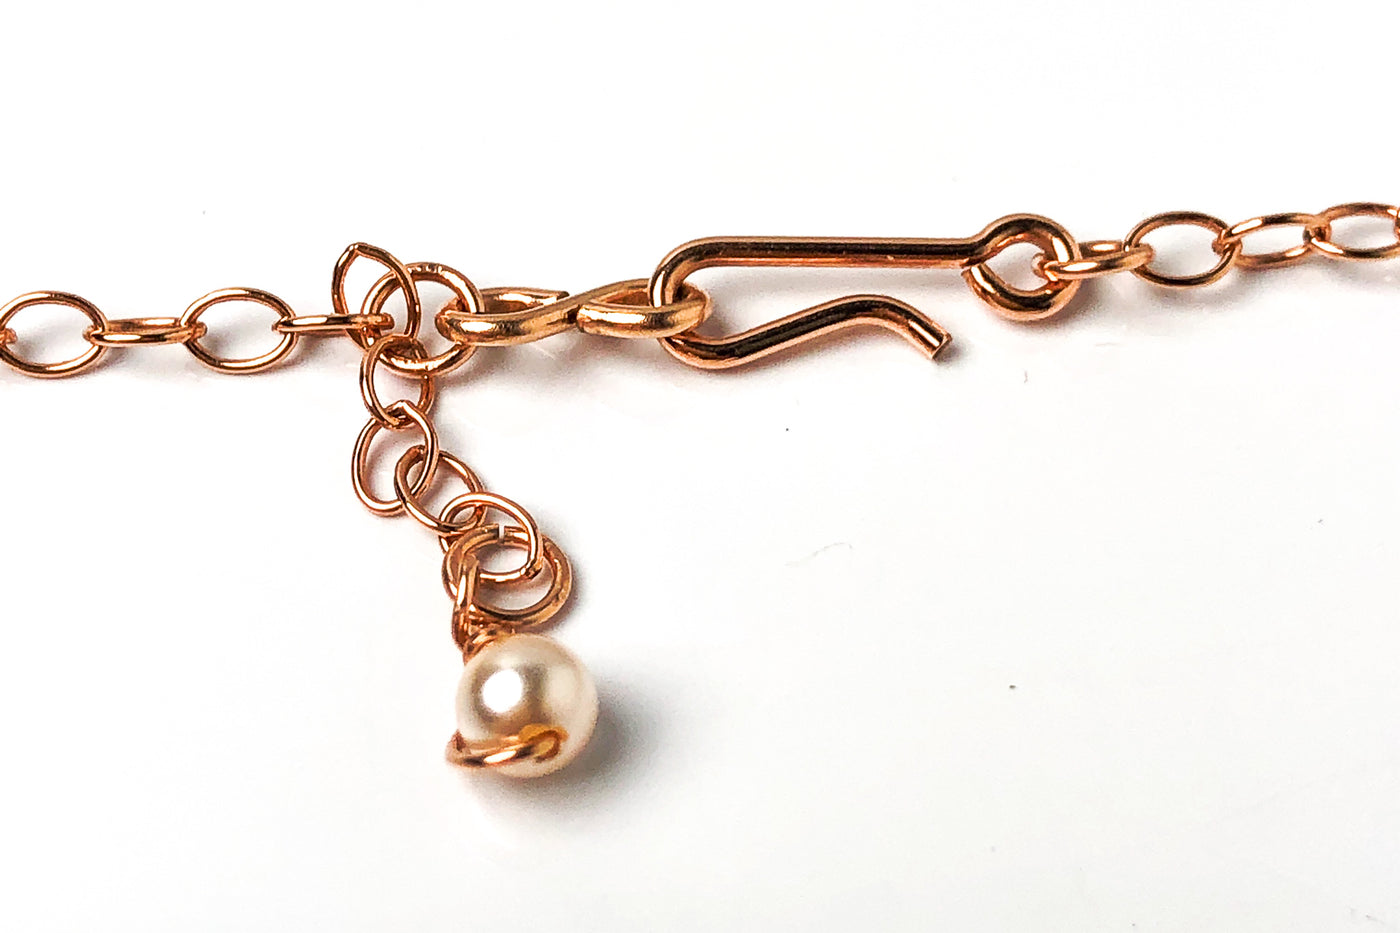 14kt Rose-gold filled Infinity clasp detail.